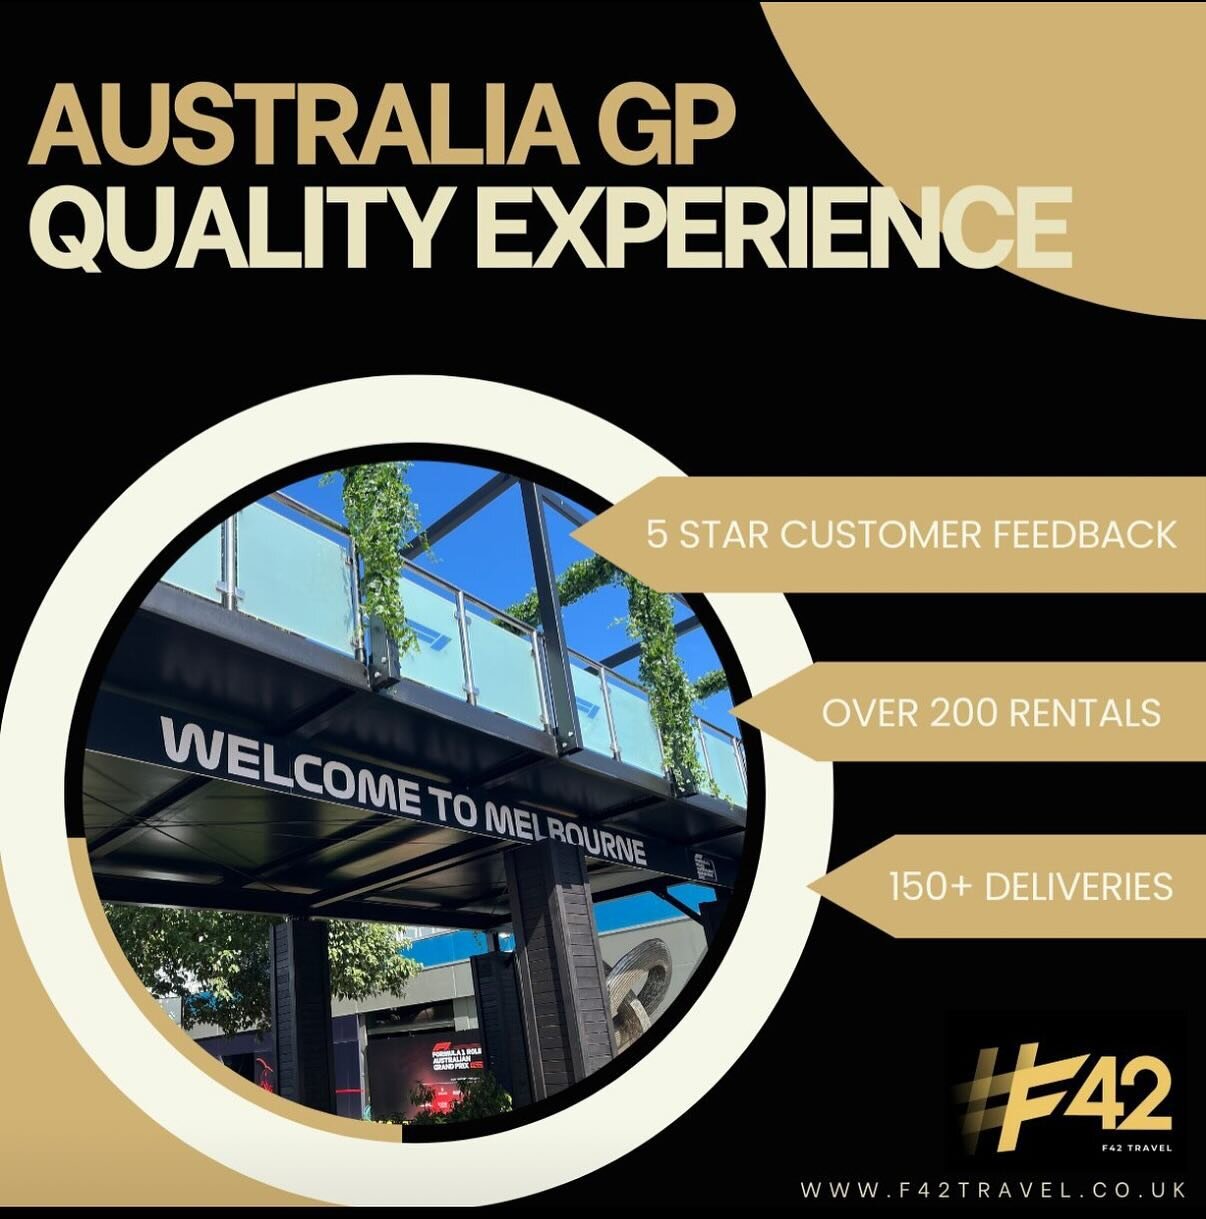 The Australian GP is a long way from home for a lot of us, but that didn&rsquo;t stop F42 from being able to provide over 200 rentals without a hitch 👌

The meticulous planning behind the scenes meant that our customers experienced a journey that wa